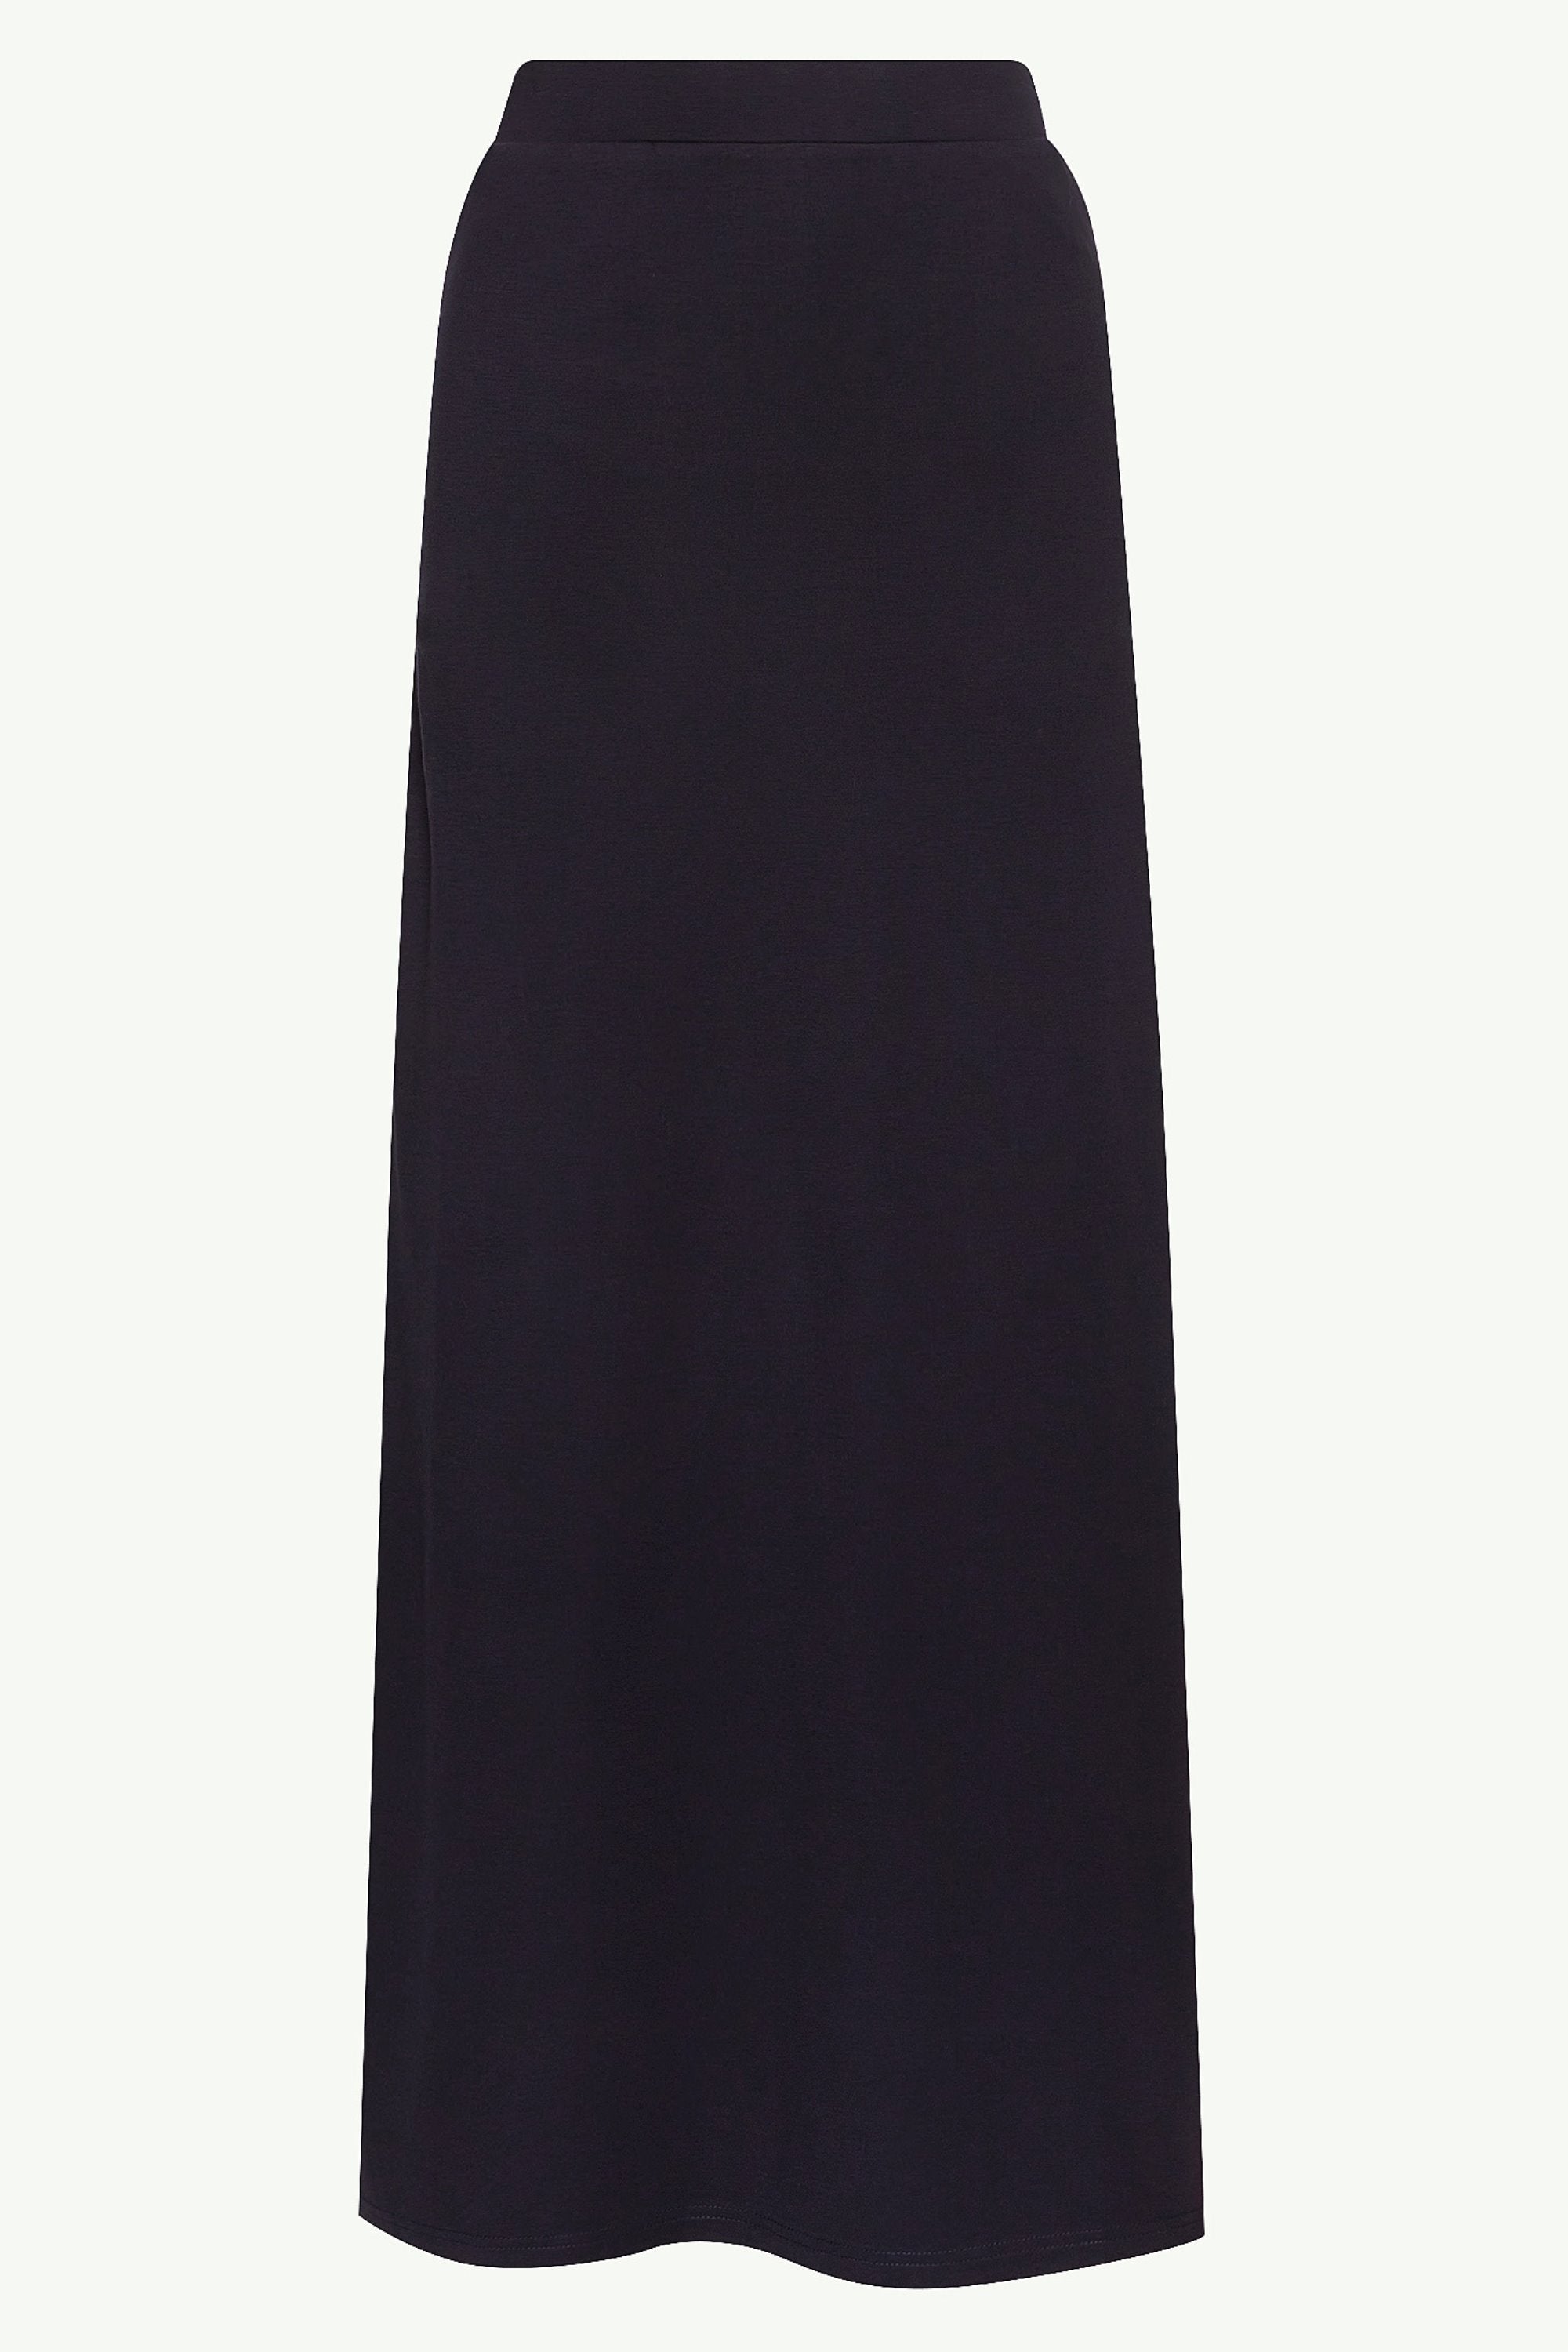 Essential Jersey Maxi Skirt - Navy Blue Clothing epschoolboard 